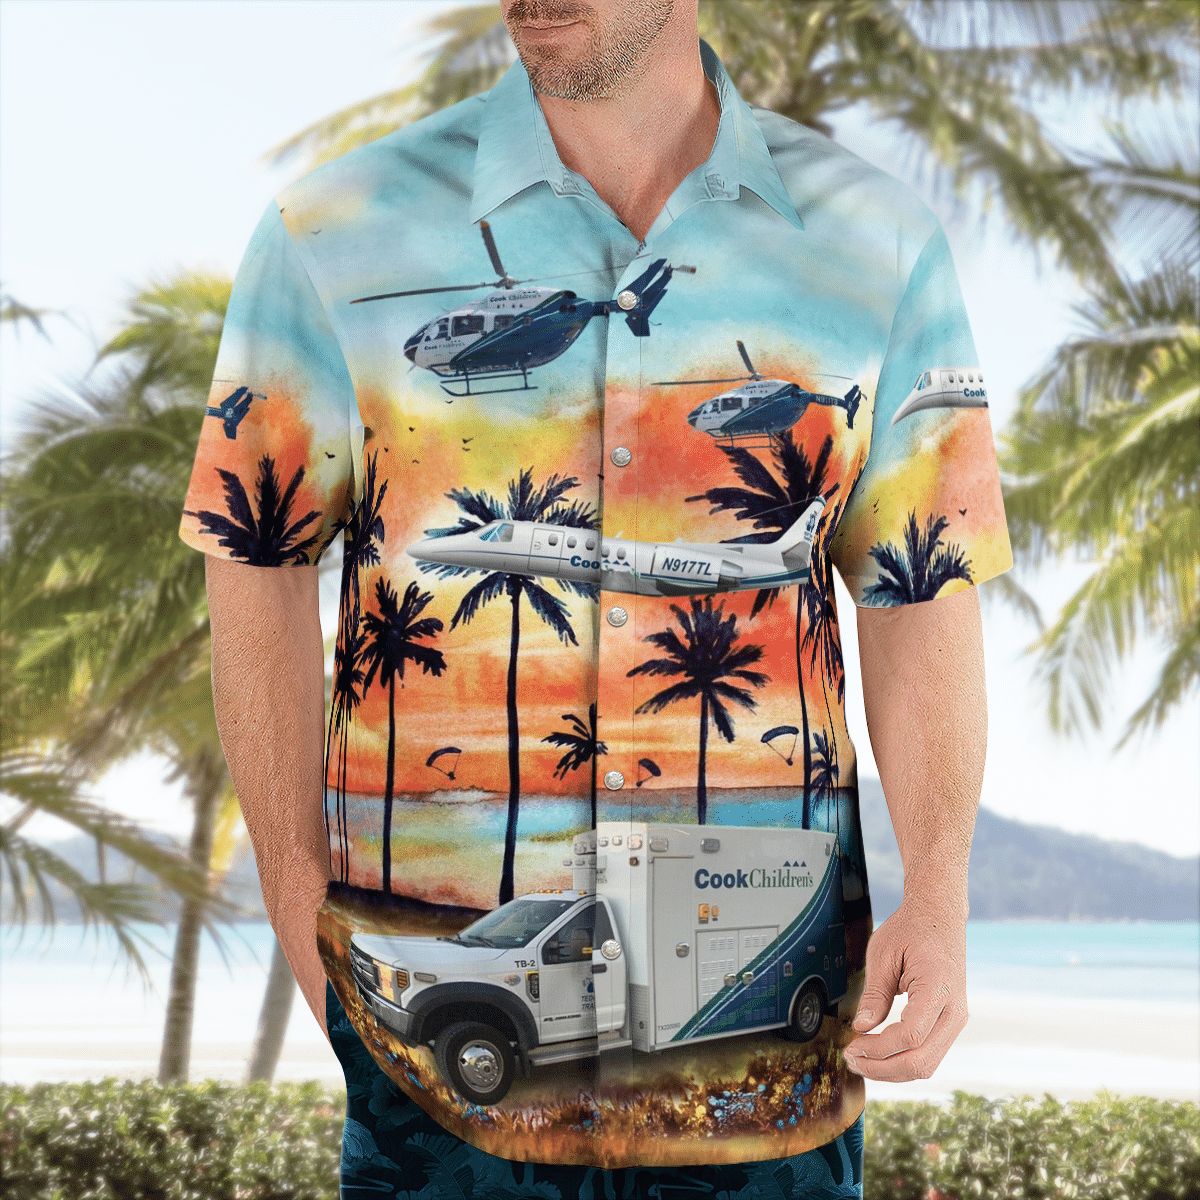 There are several styles of beach and Hawaiian shorts and tops to choose from 72